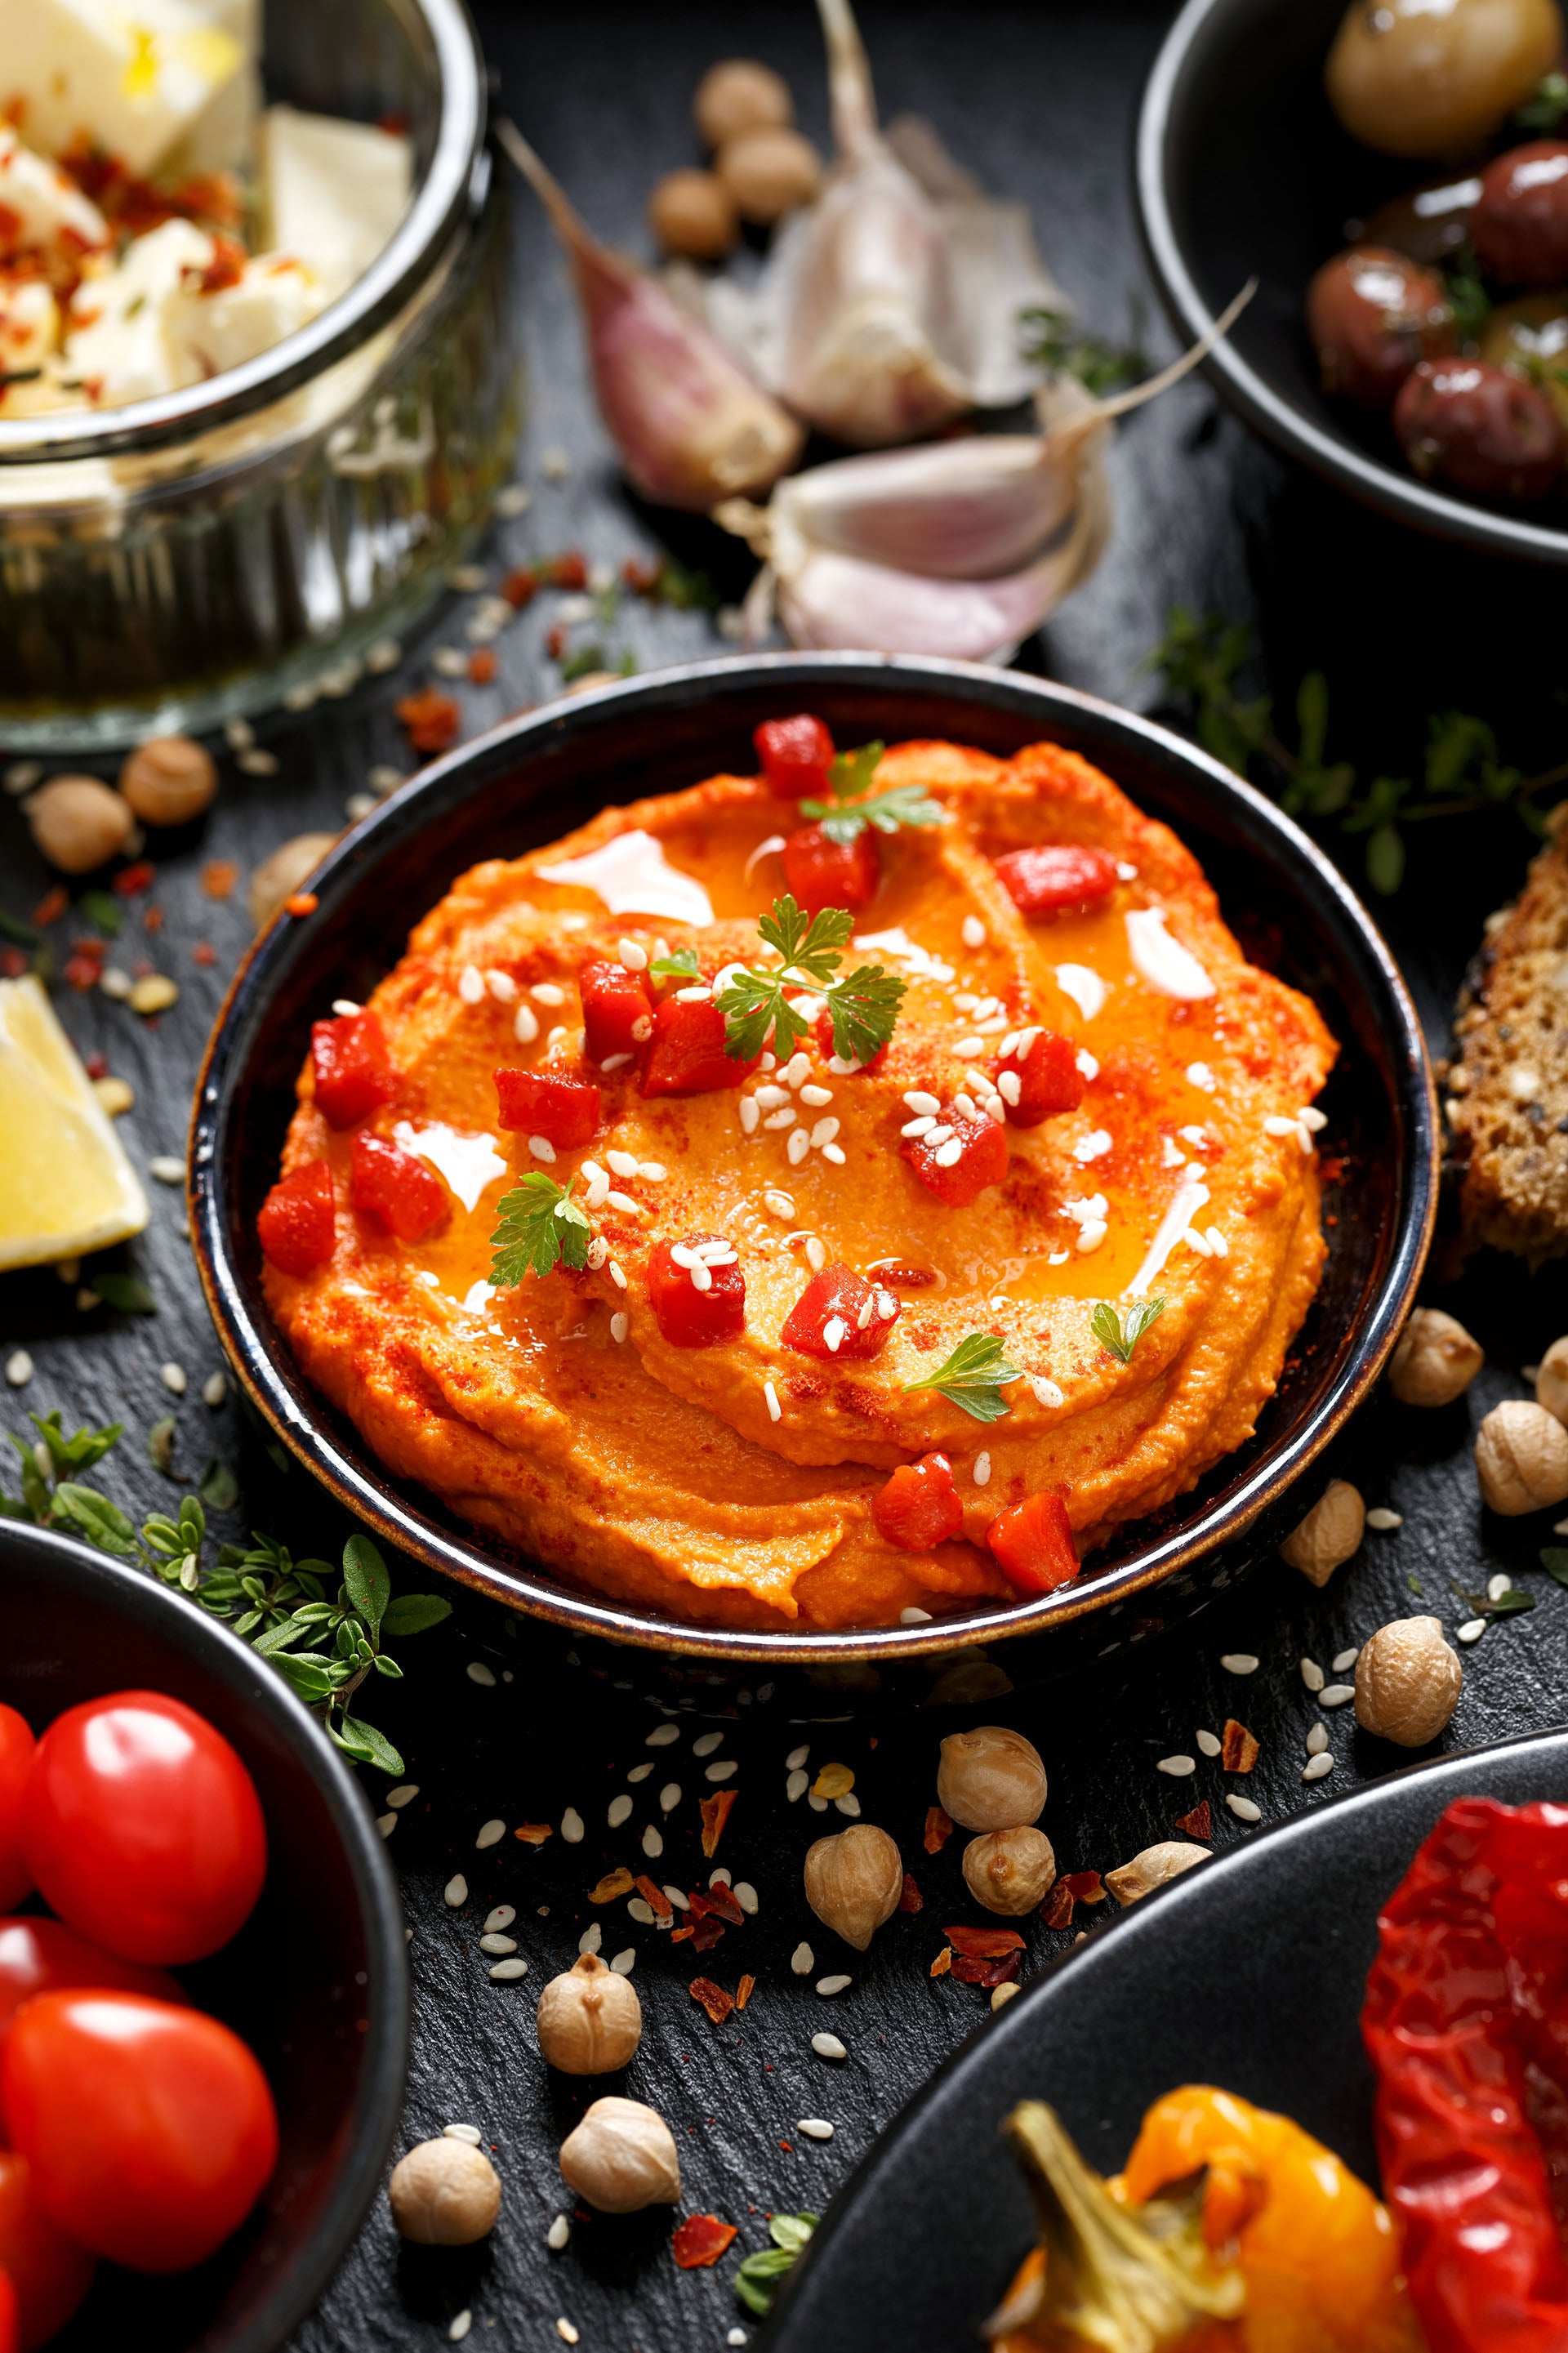 64120 Red Pepper and Jalapeno Hummus VG